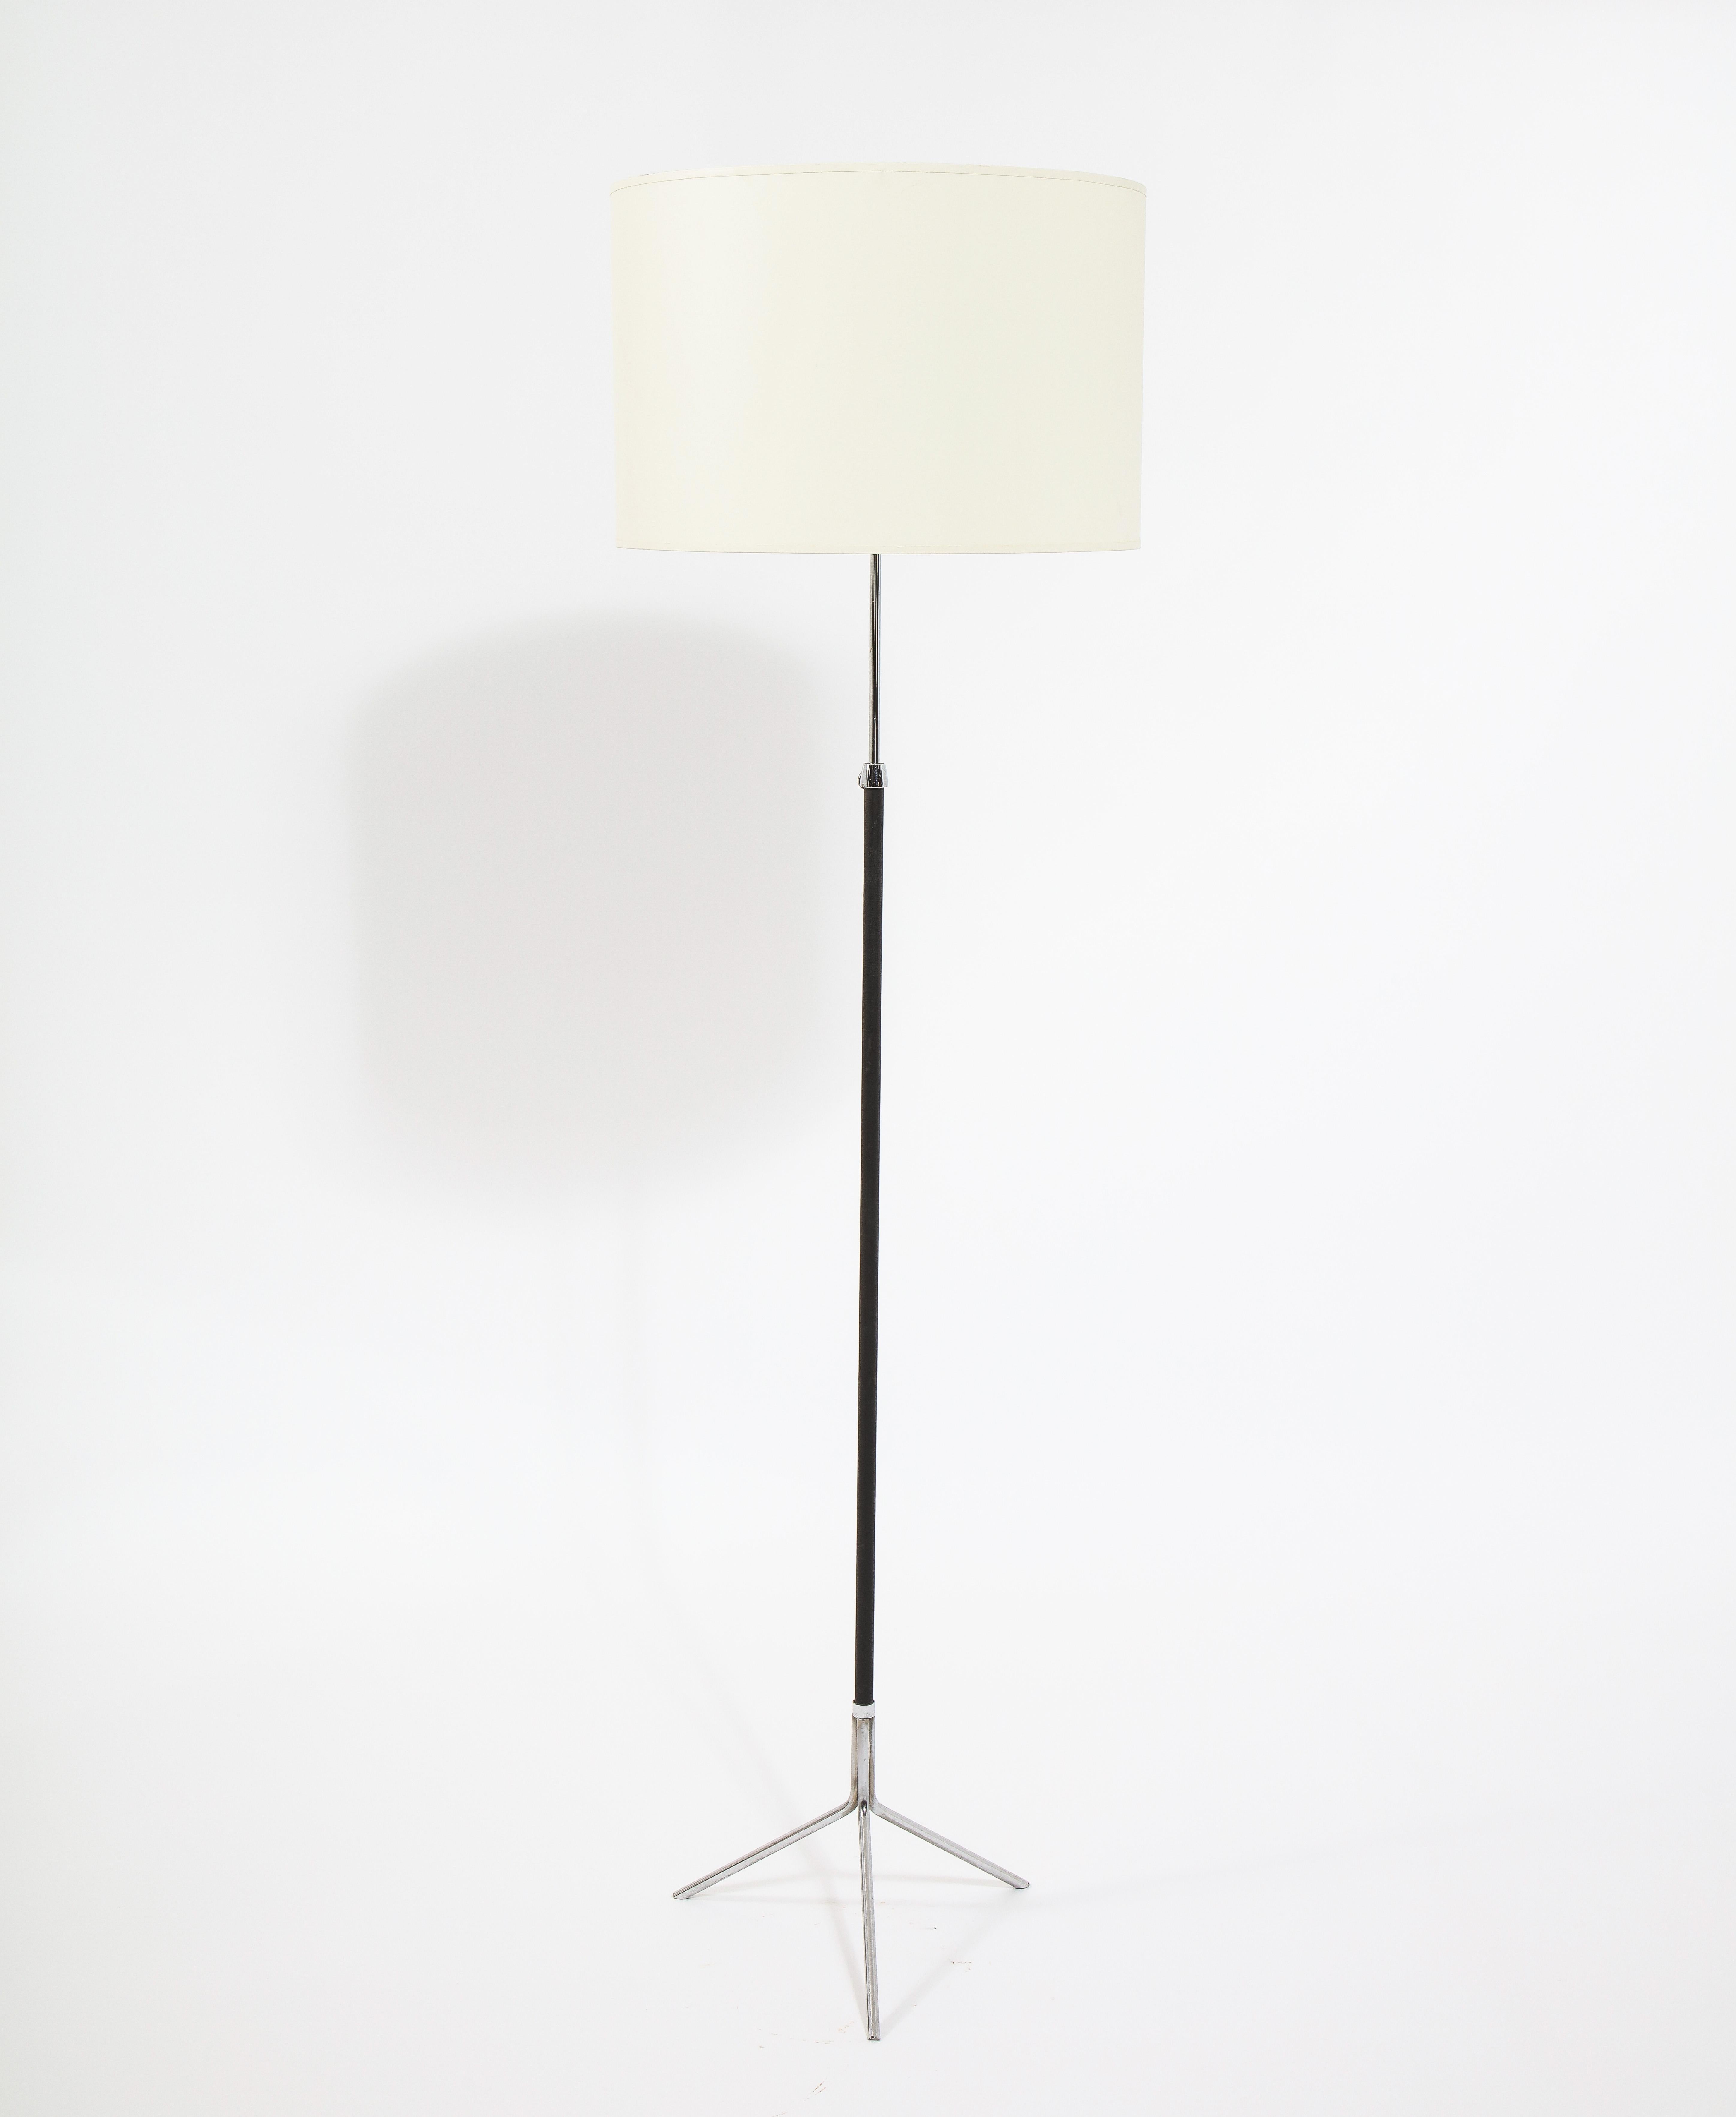 Mid-Century Modern Tripod Nickel and Stitched Leather Standing Lamp after Adnet, France 1950's For Sale